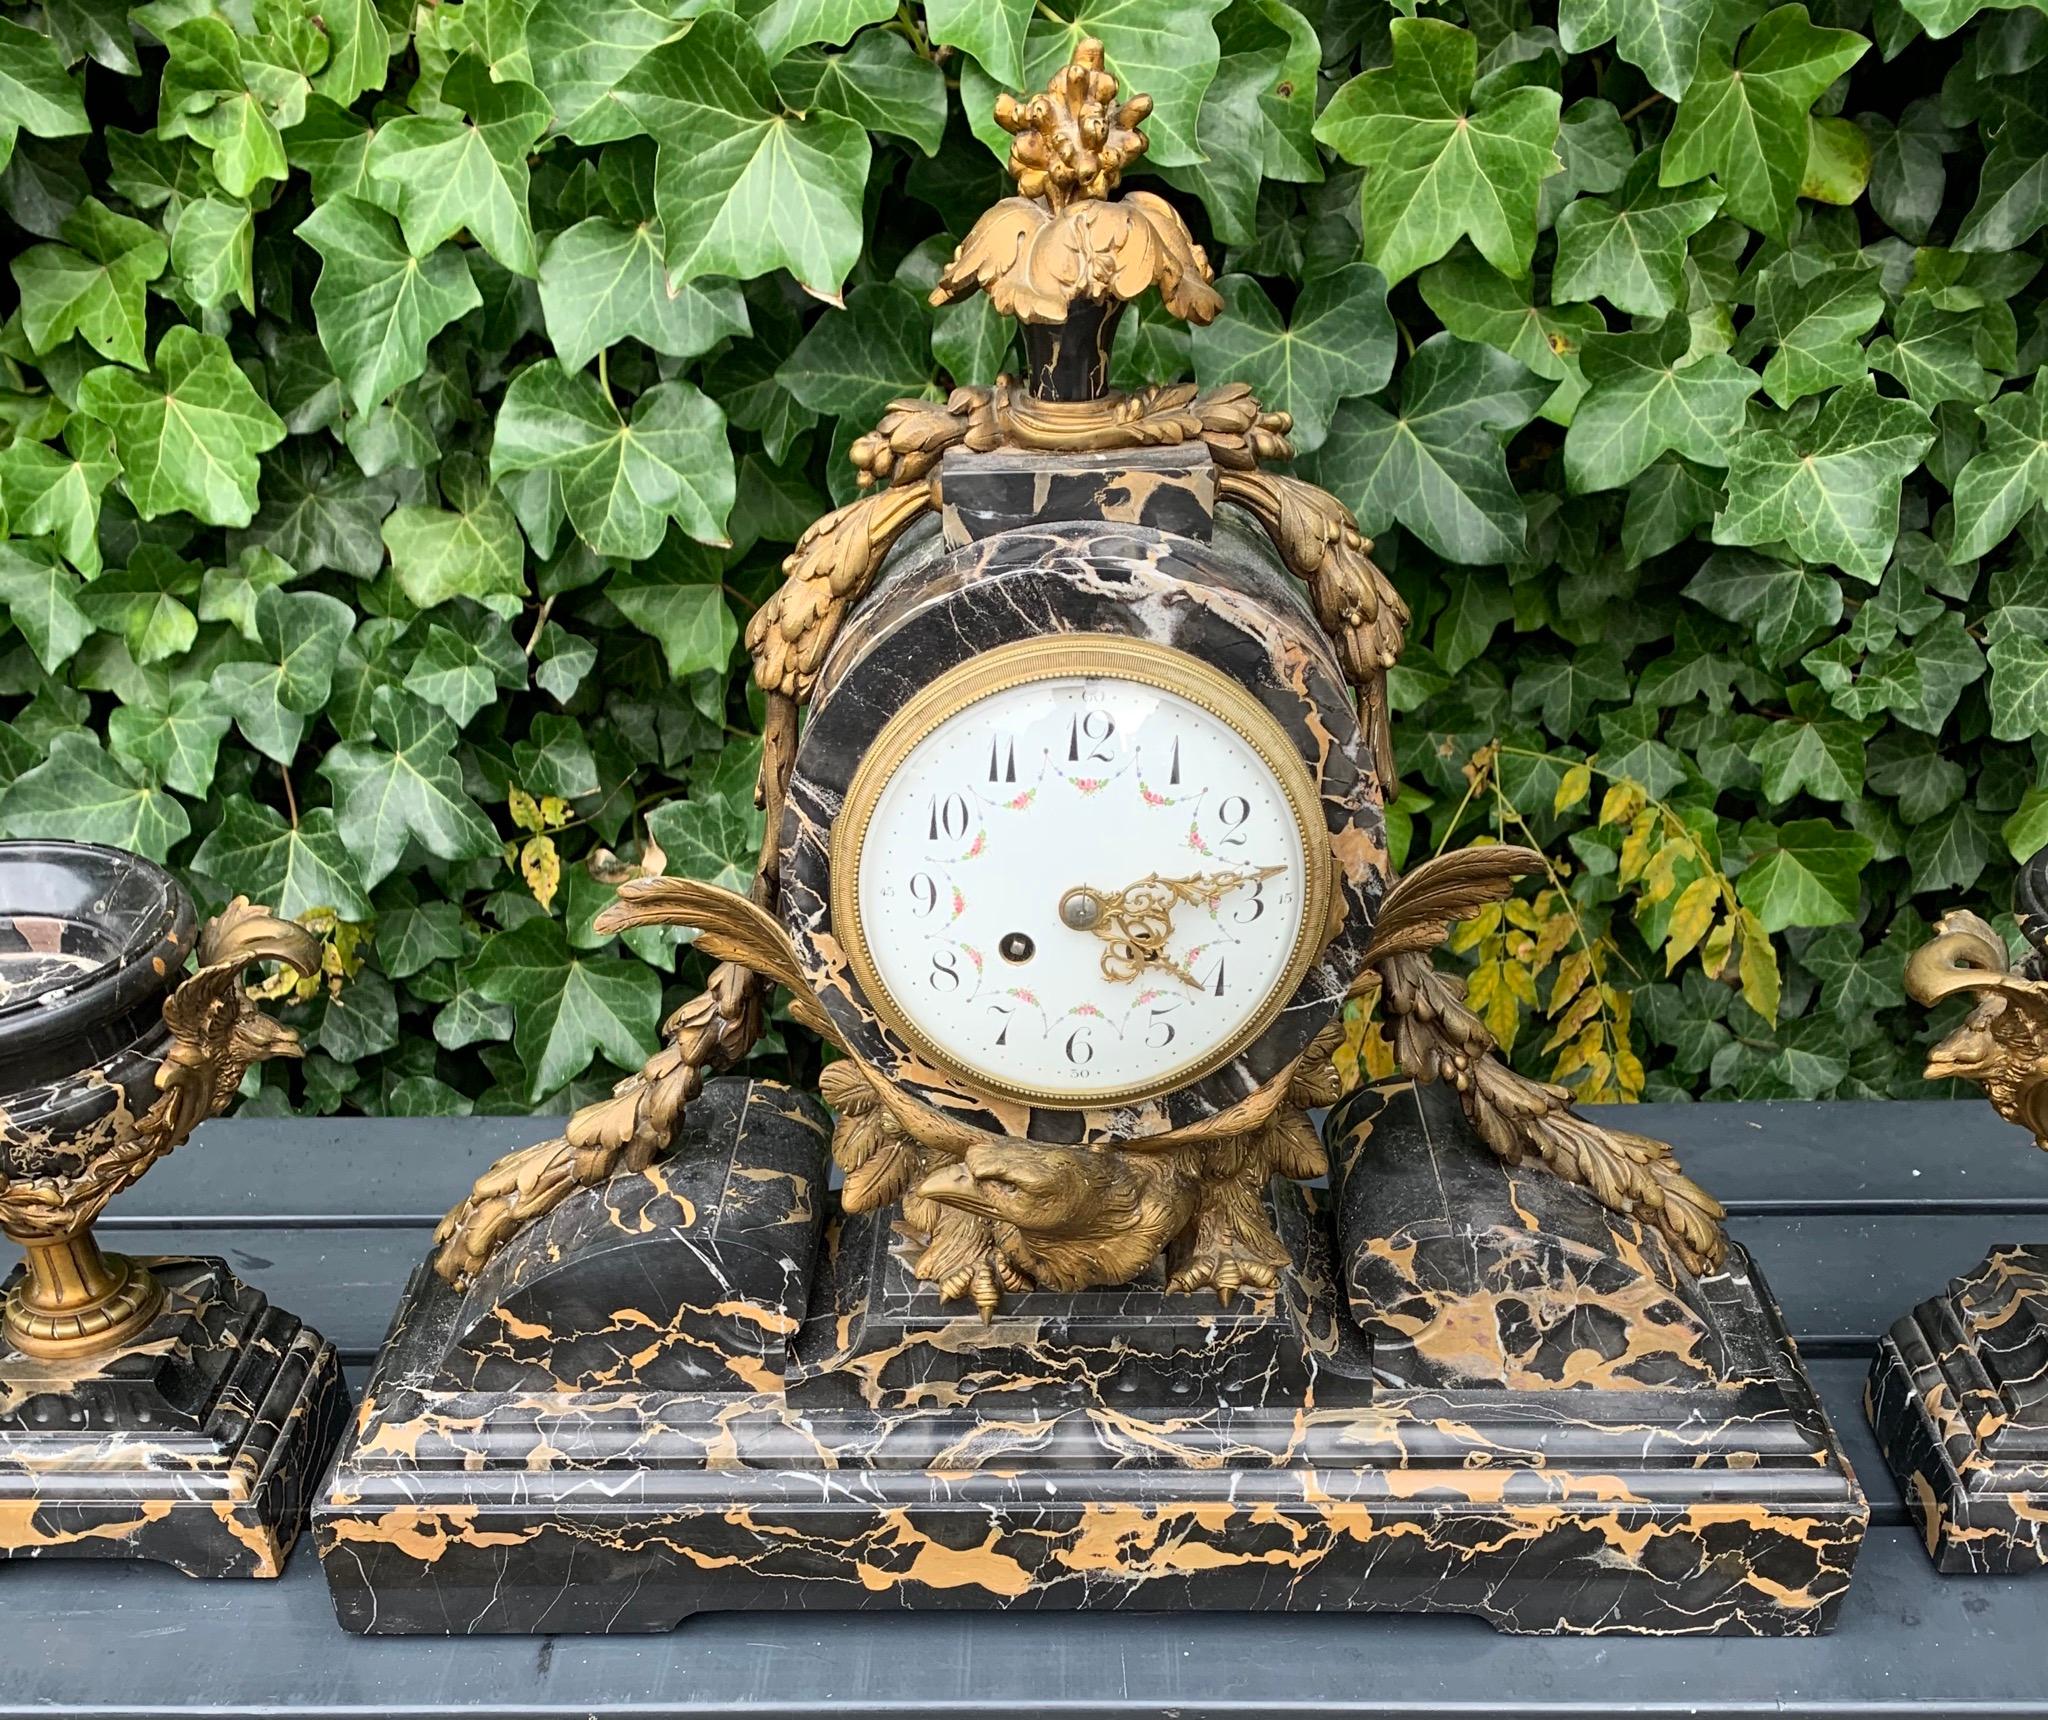 Unique and amazing 19th century mantel clock garniture.

If you are looking for a one of a kind and truly spectacular clock to grace your living space then this work of beauty could soon be displayed on your mantel or sidetable. You will rarely see